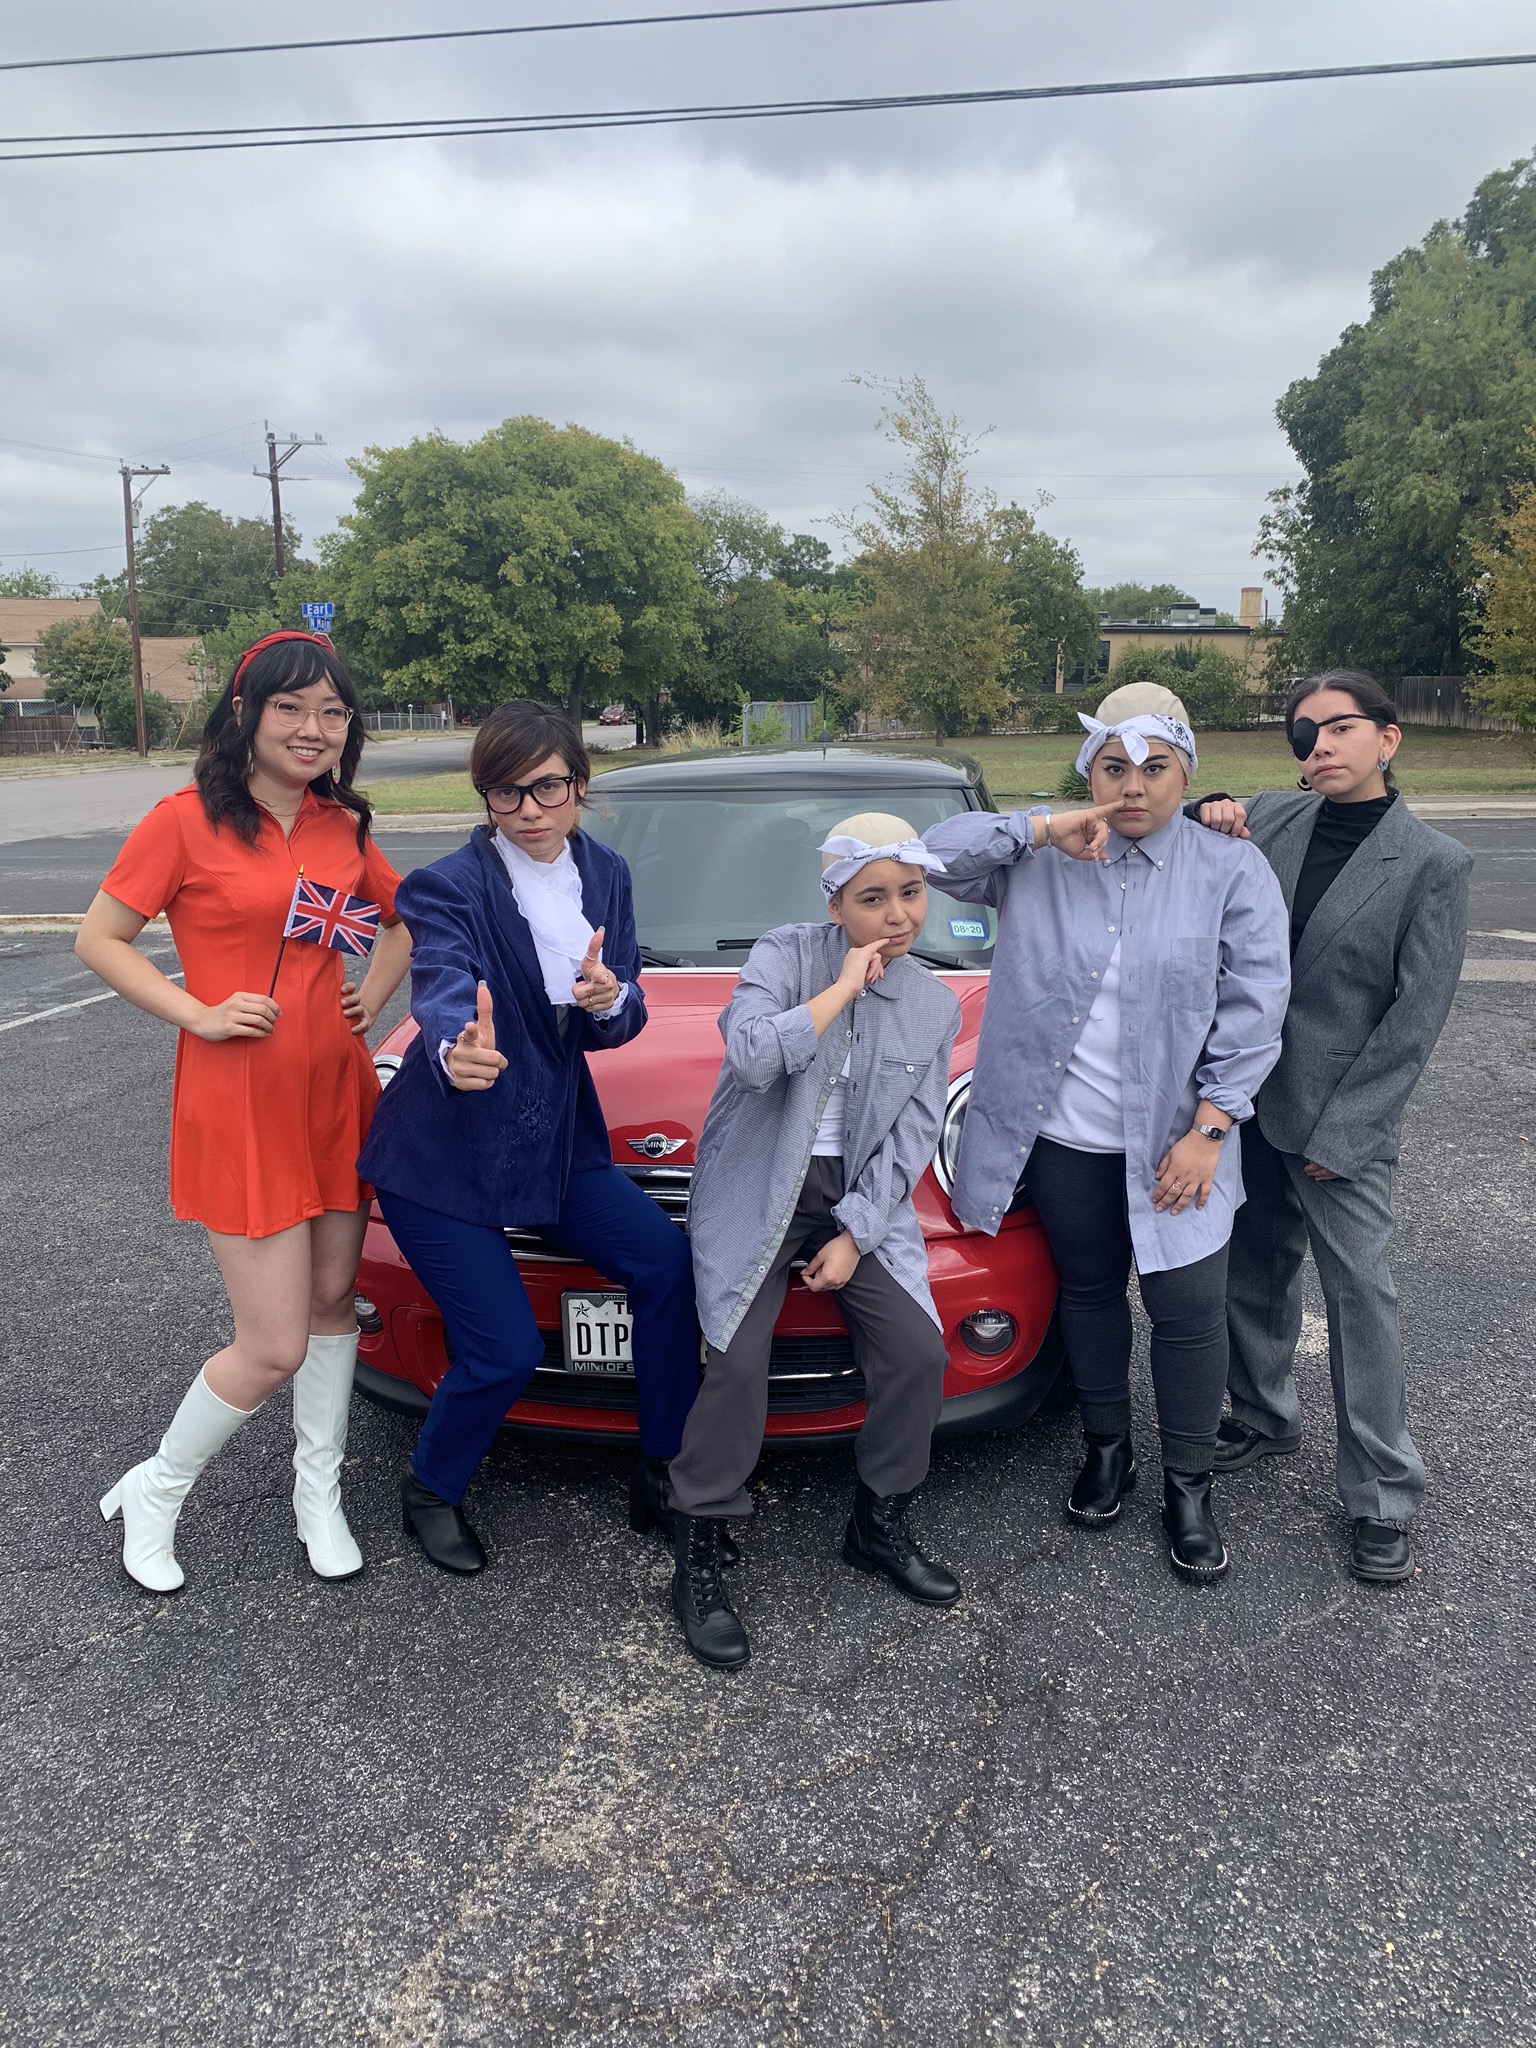 Austin Powers group costume, costumes for Halloween 2020